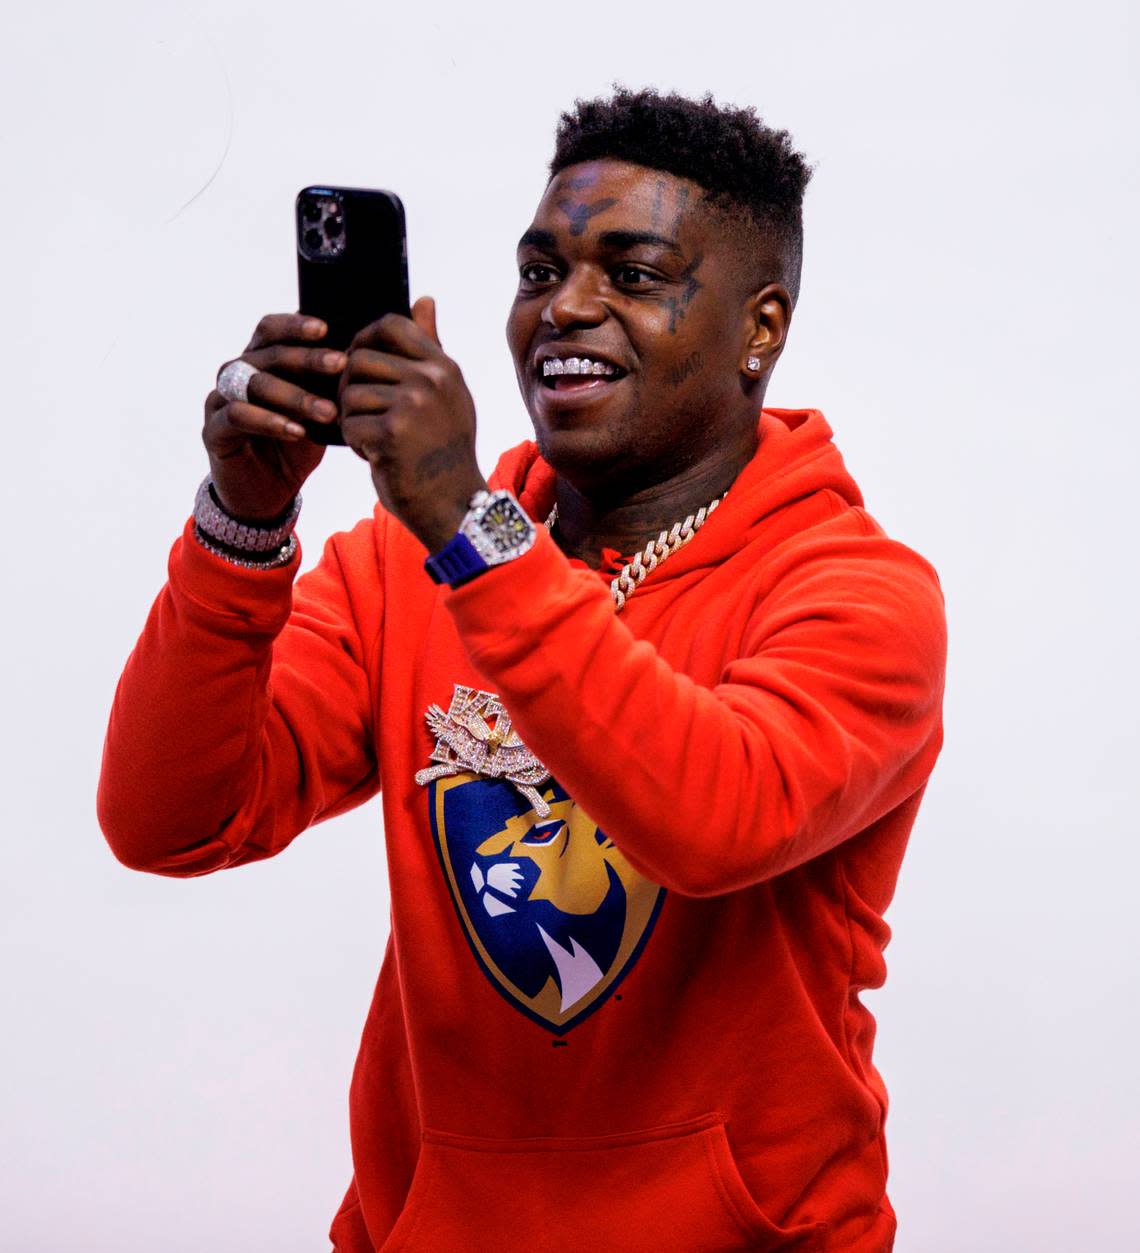 Rapper Kodak Black during the third period of Game 1 of a first round NHL Stanley Cup series between the Florida Panthers against the Washington Capitals at FLA Live Arena on Tuesday, May 3, 2022 in Sunrise, Fl.